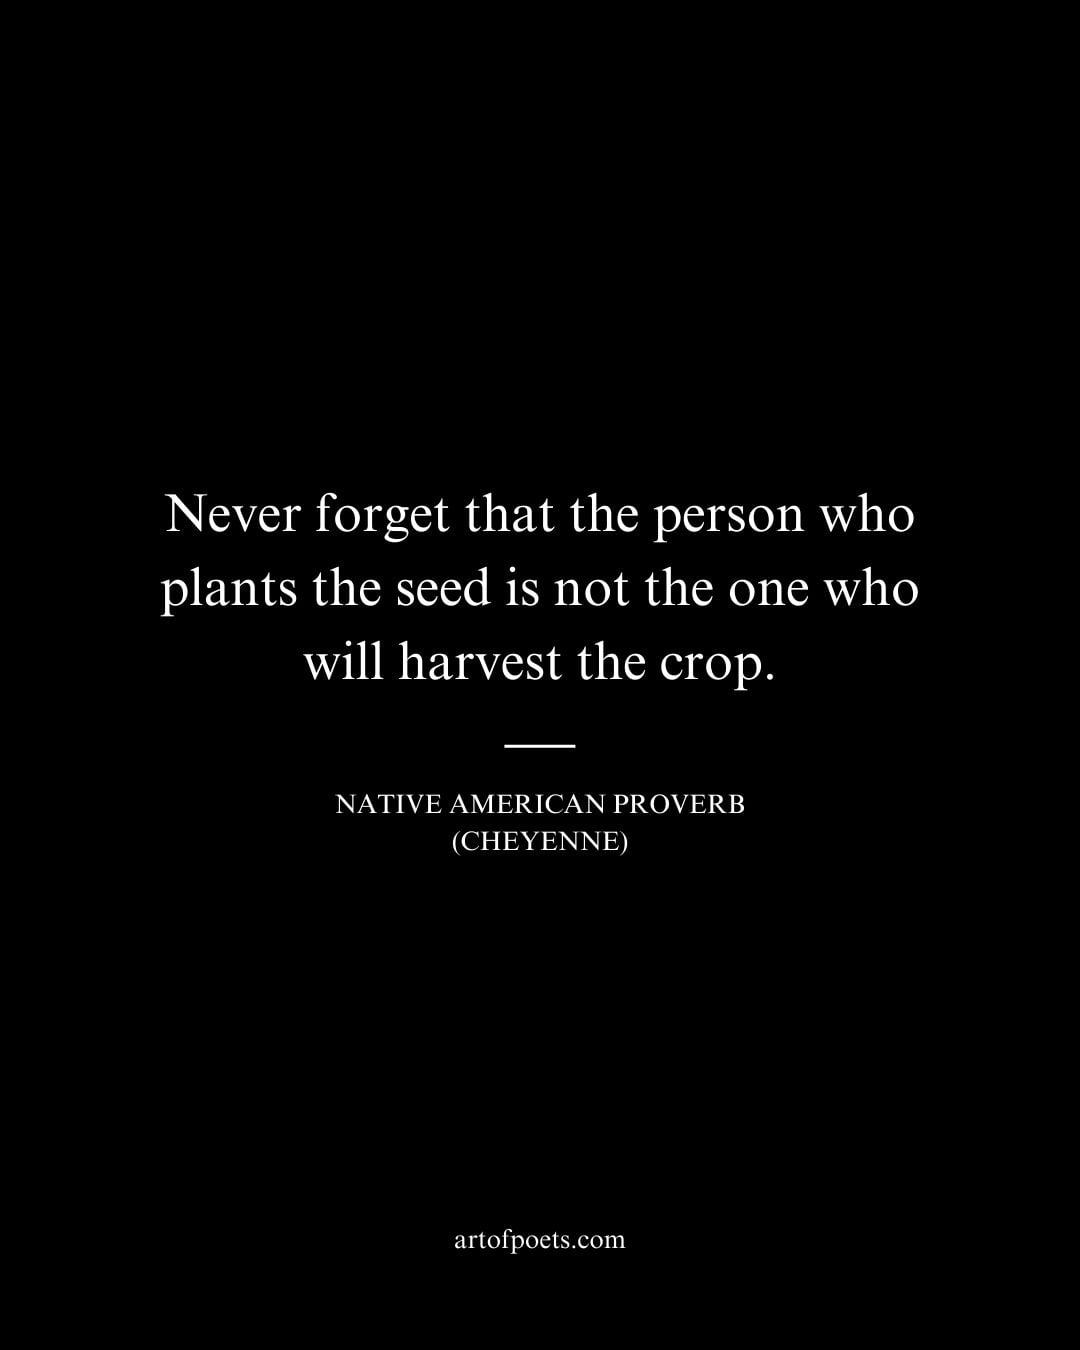 Never forget that the person who plants the seed is not the one who will harvest the crop